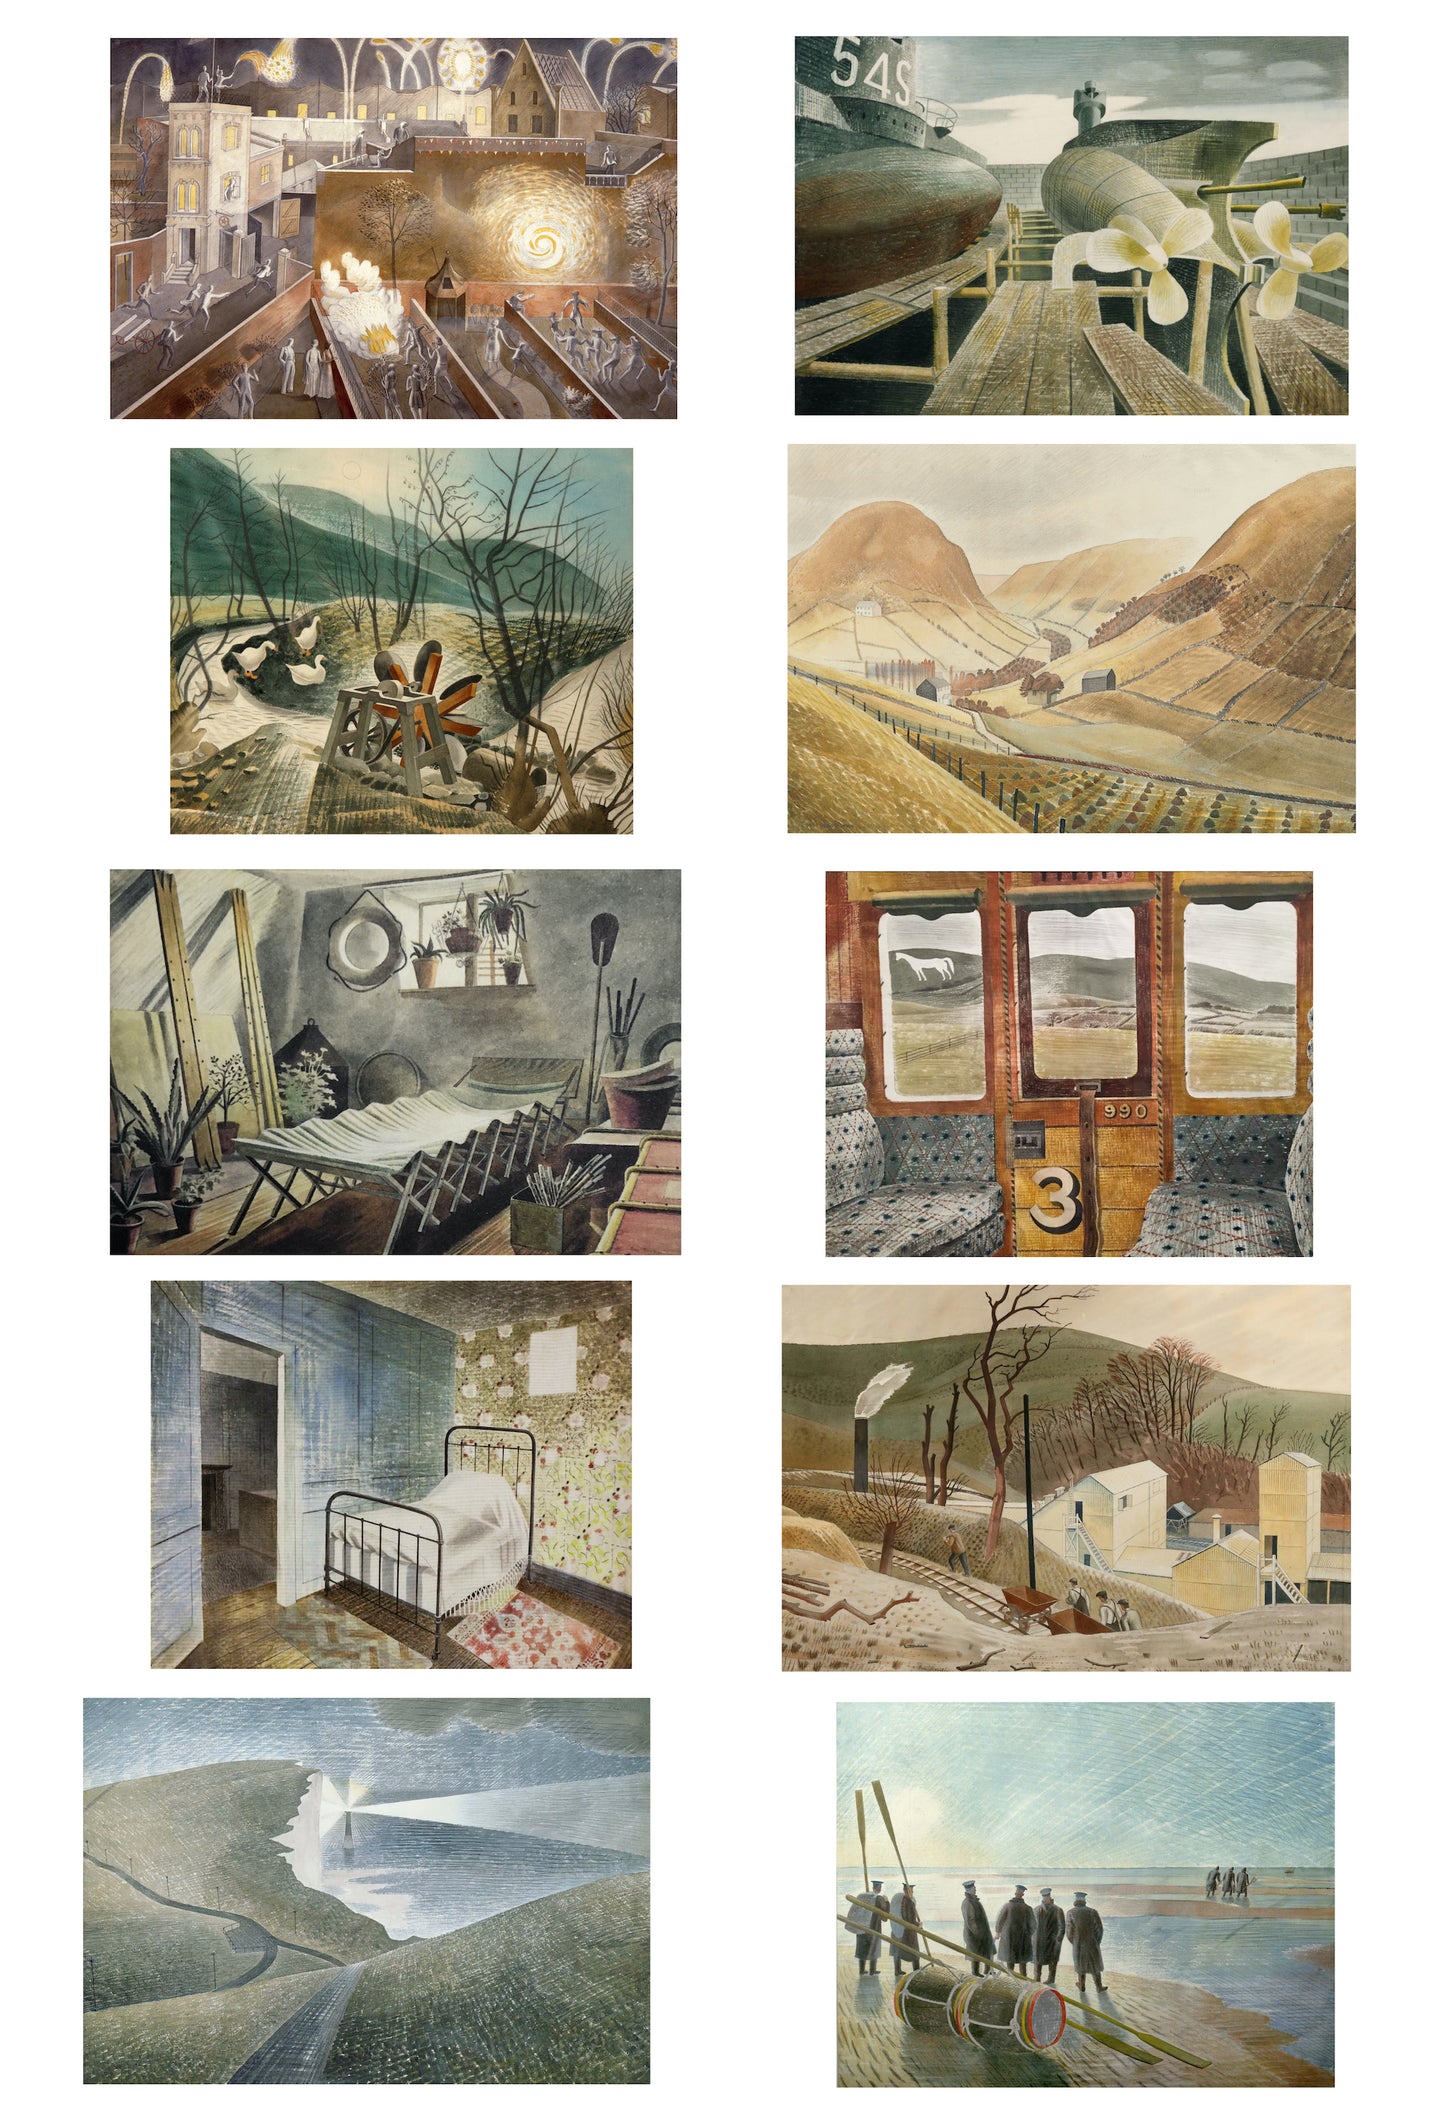 The Eric Ravilous Postcard Collection